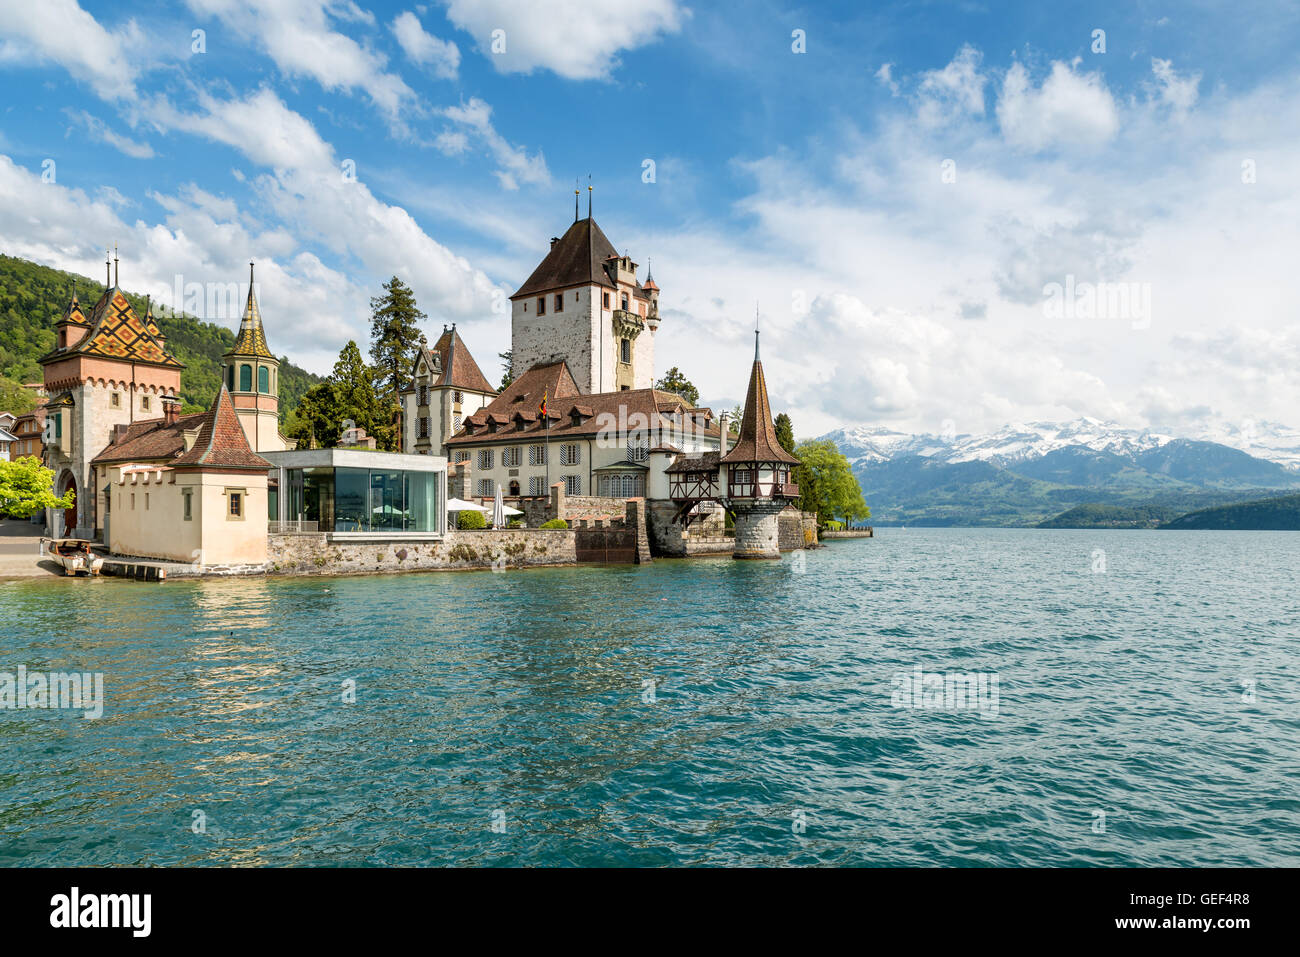 Beautiful little tower of Oberhofen castle in the Thun lake with mountains on background in Switzerland, near Bern. Stock Photo